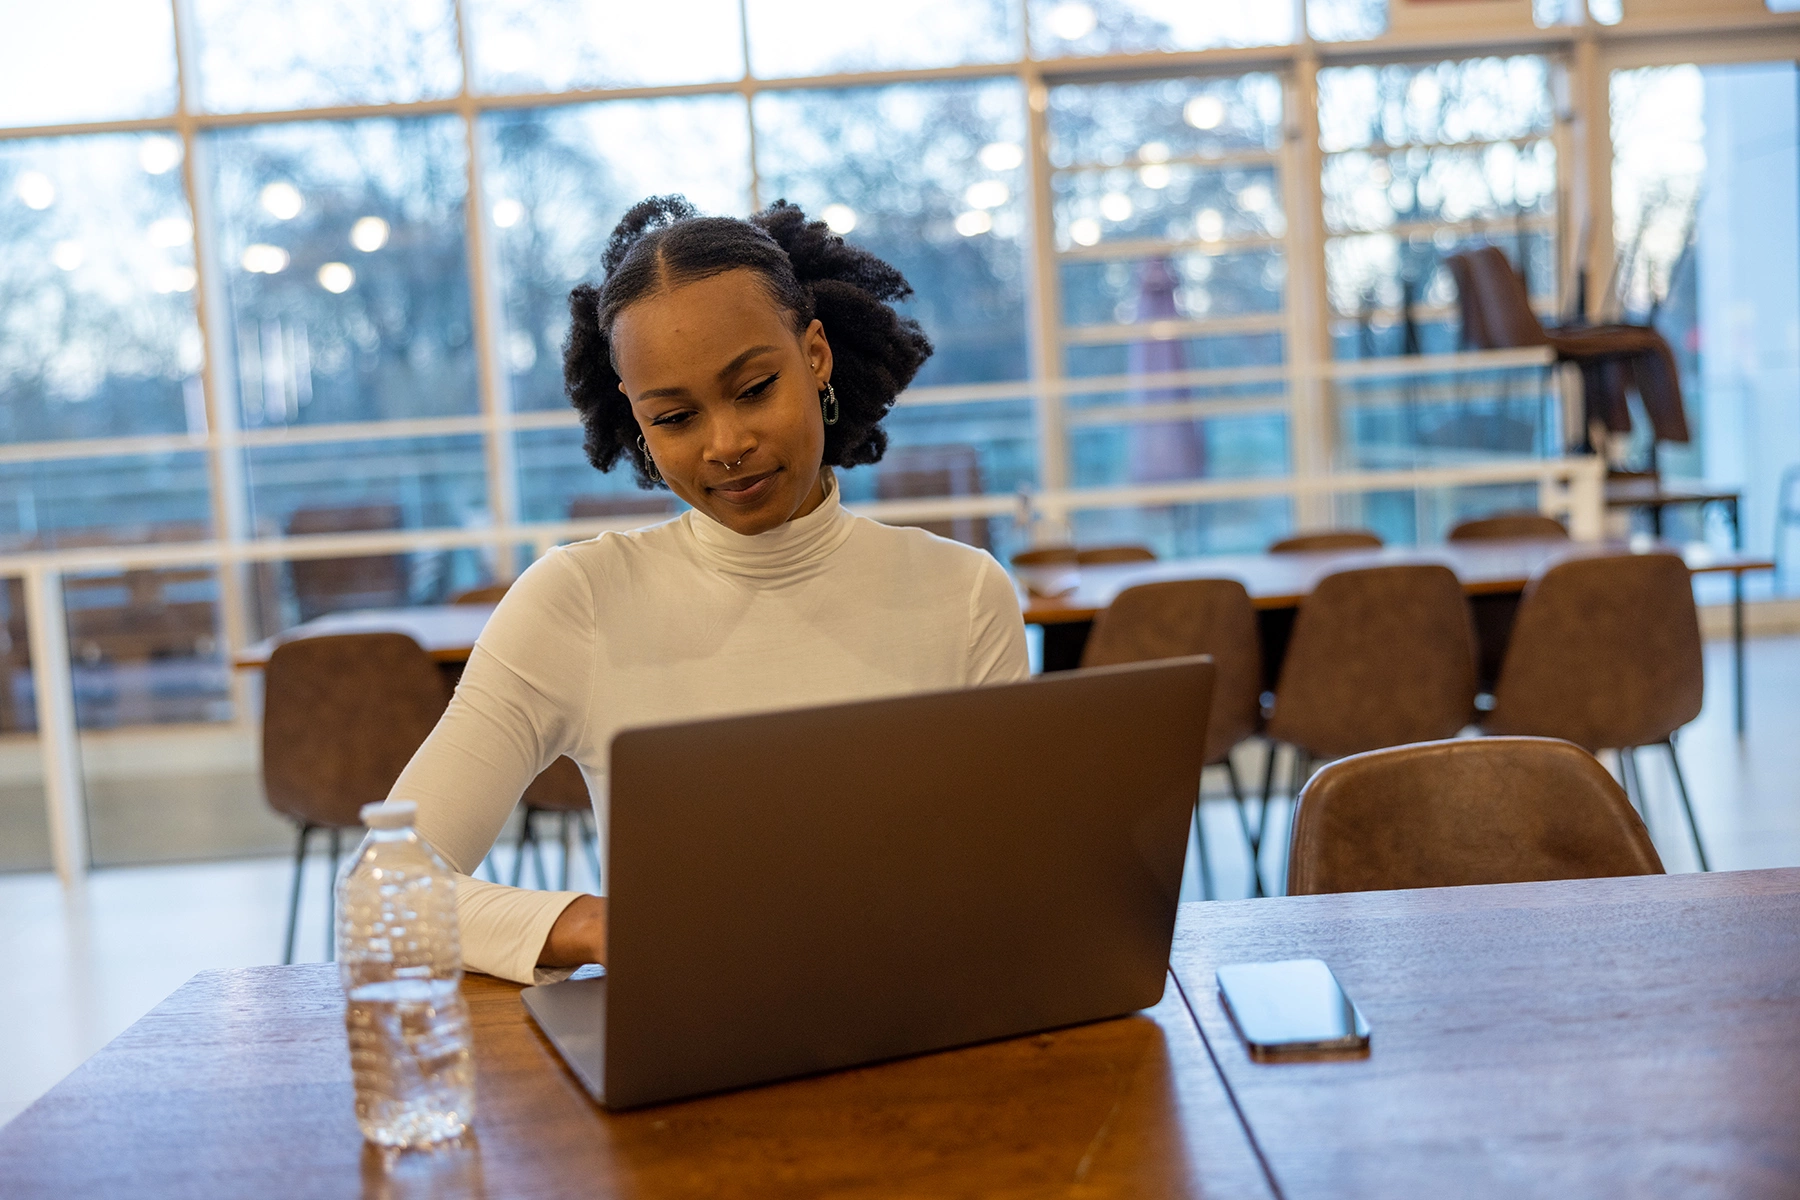 Young woman using a laptop in a library